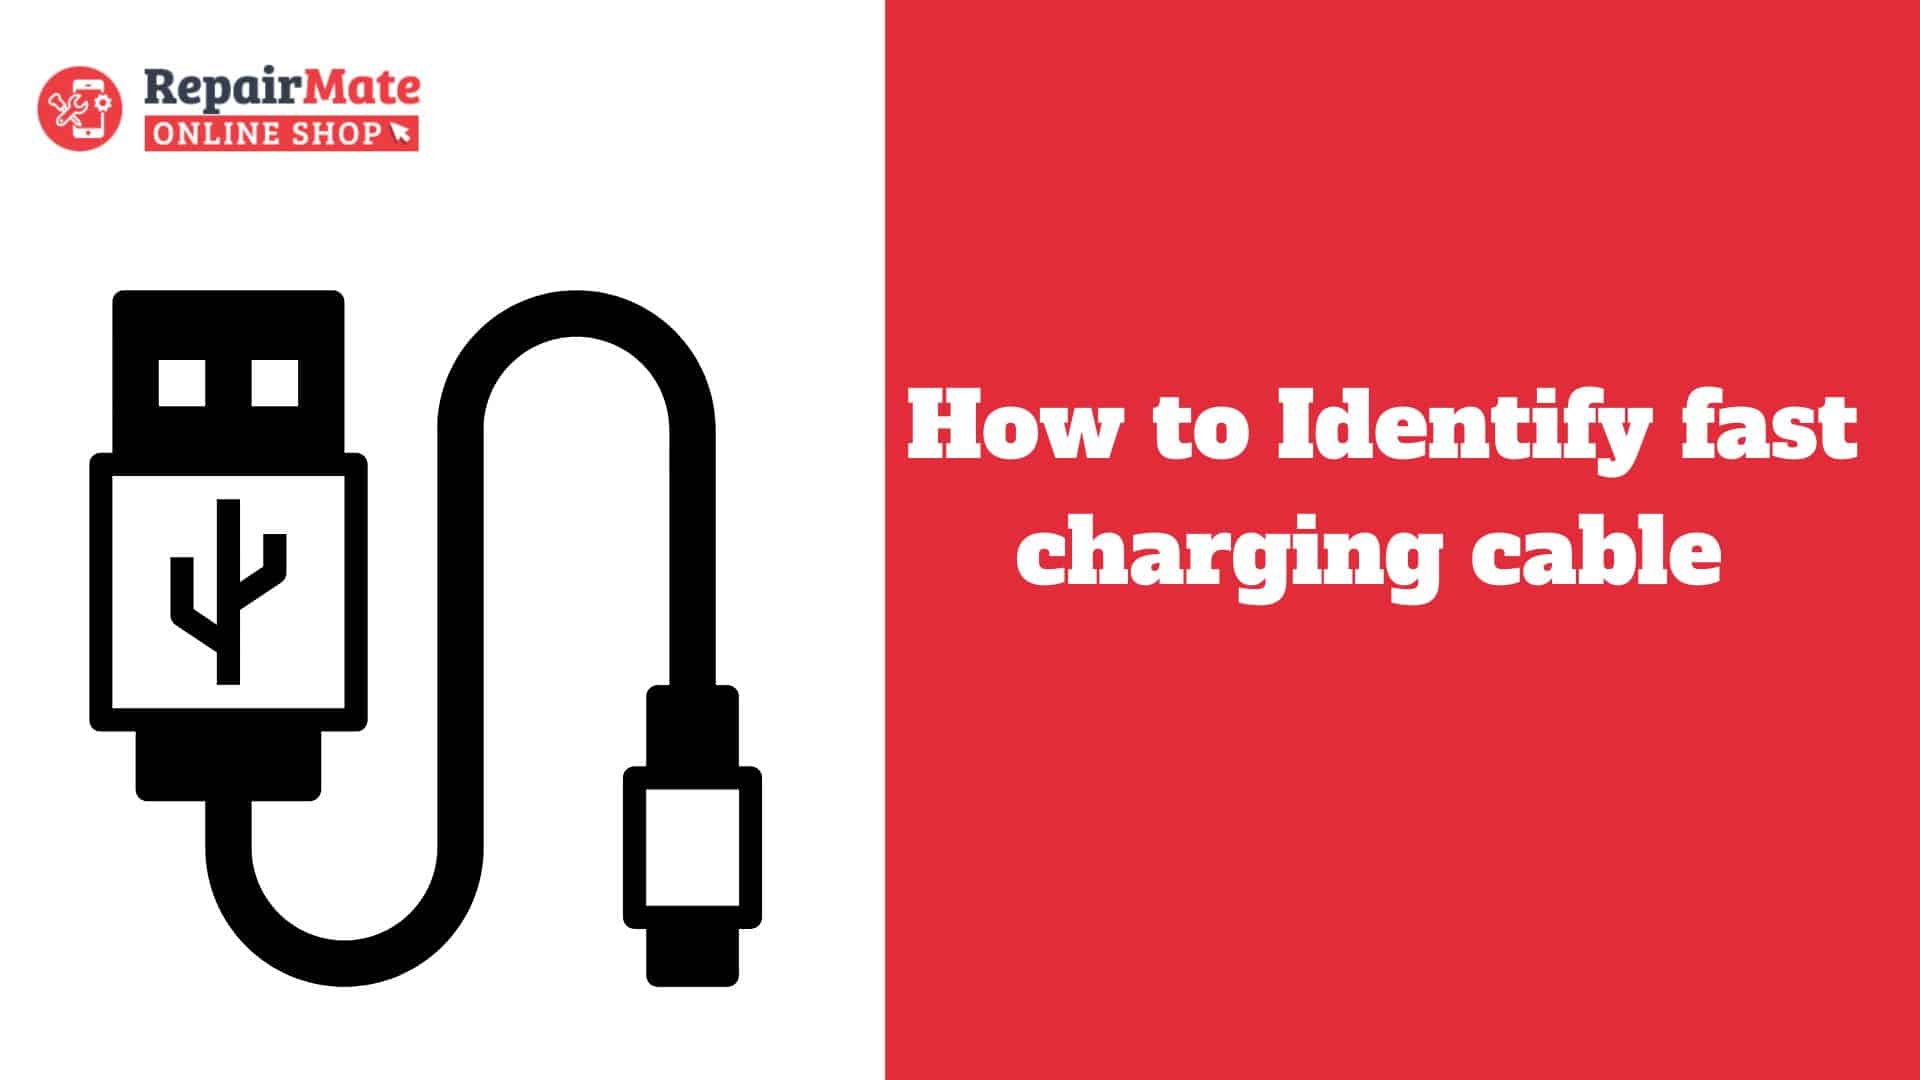 How to Identify fast charging cable